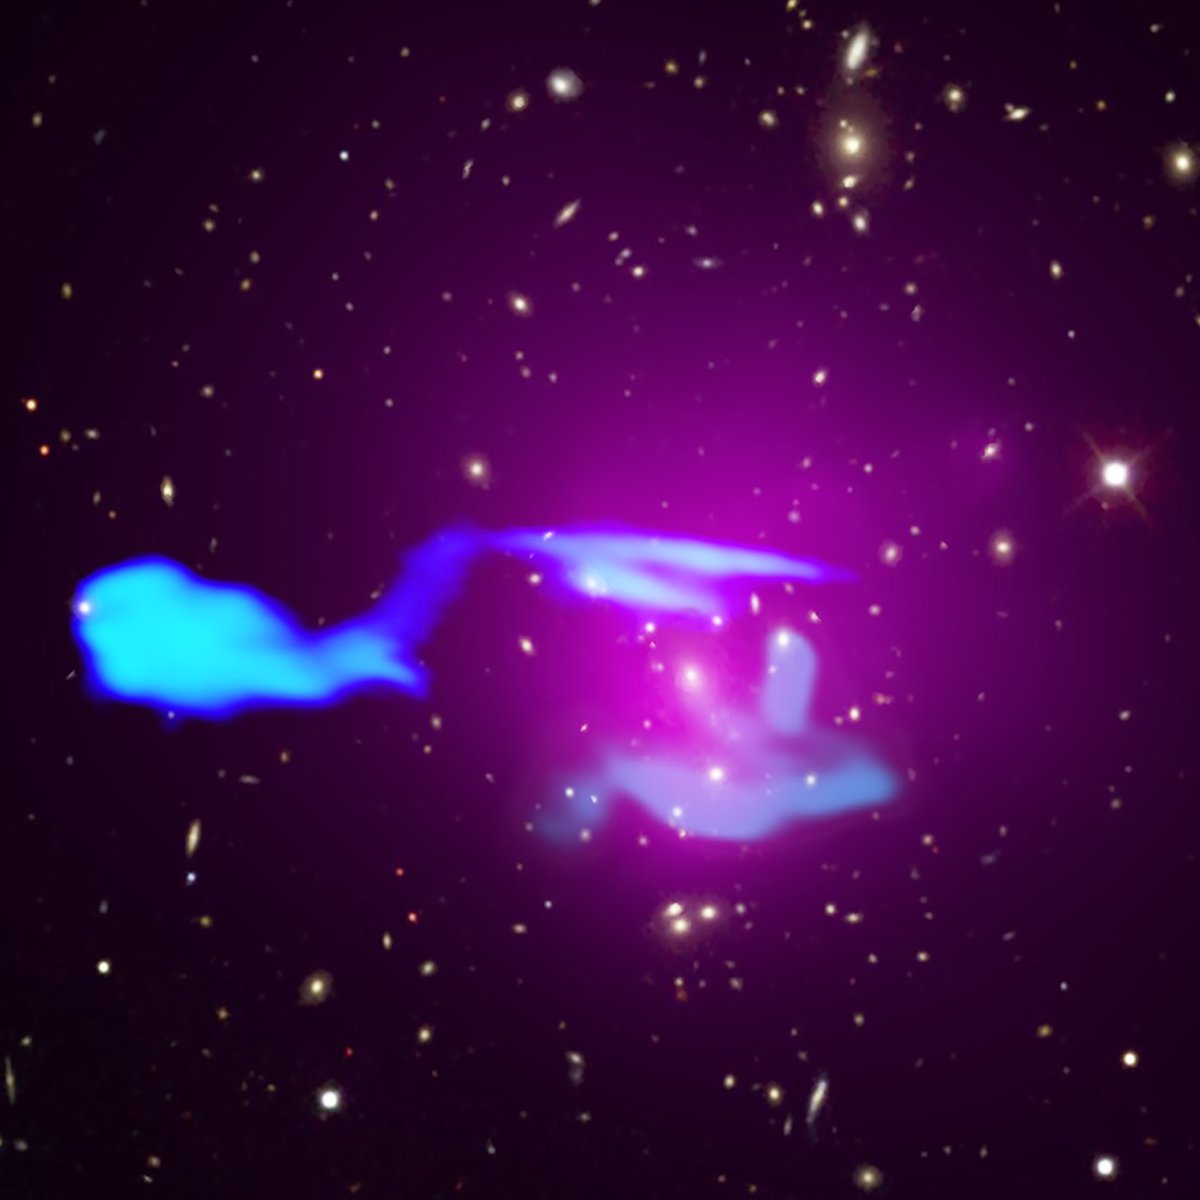 Hidden in a distant galaxy cluster collision, about 1.62 billion light-years from Earth, are wisps of gas that some people think resemble the Starship Enterprise. Others think the wisps look like time-traveling whales in space. Either way, Abell 1033 *engages* on #StarTrekDay!🖖